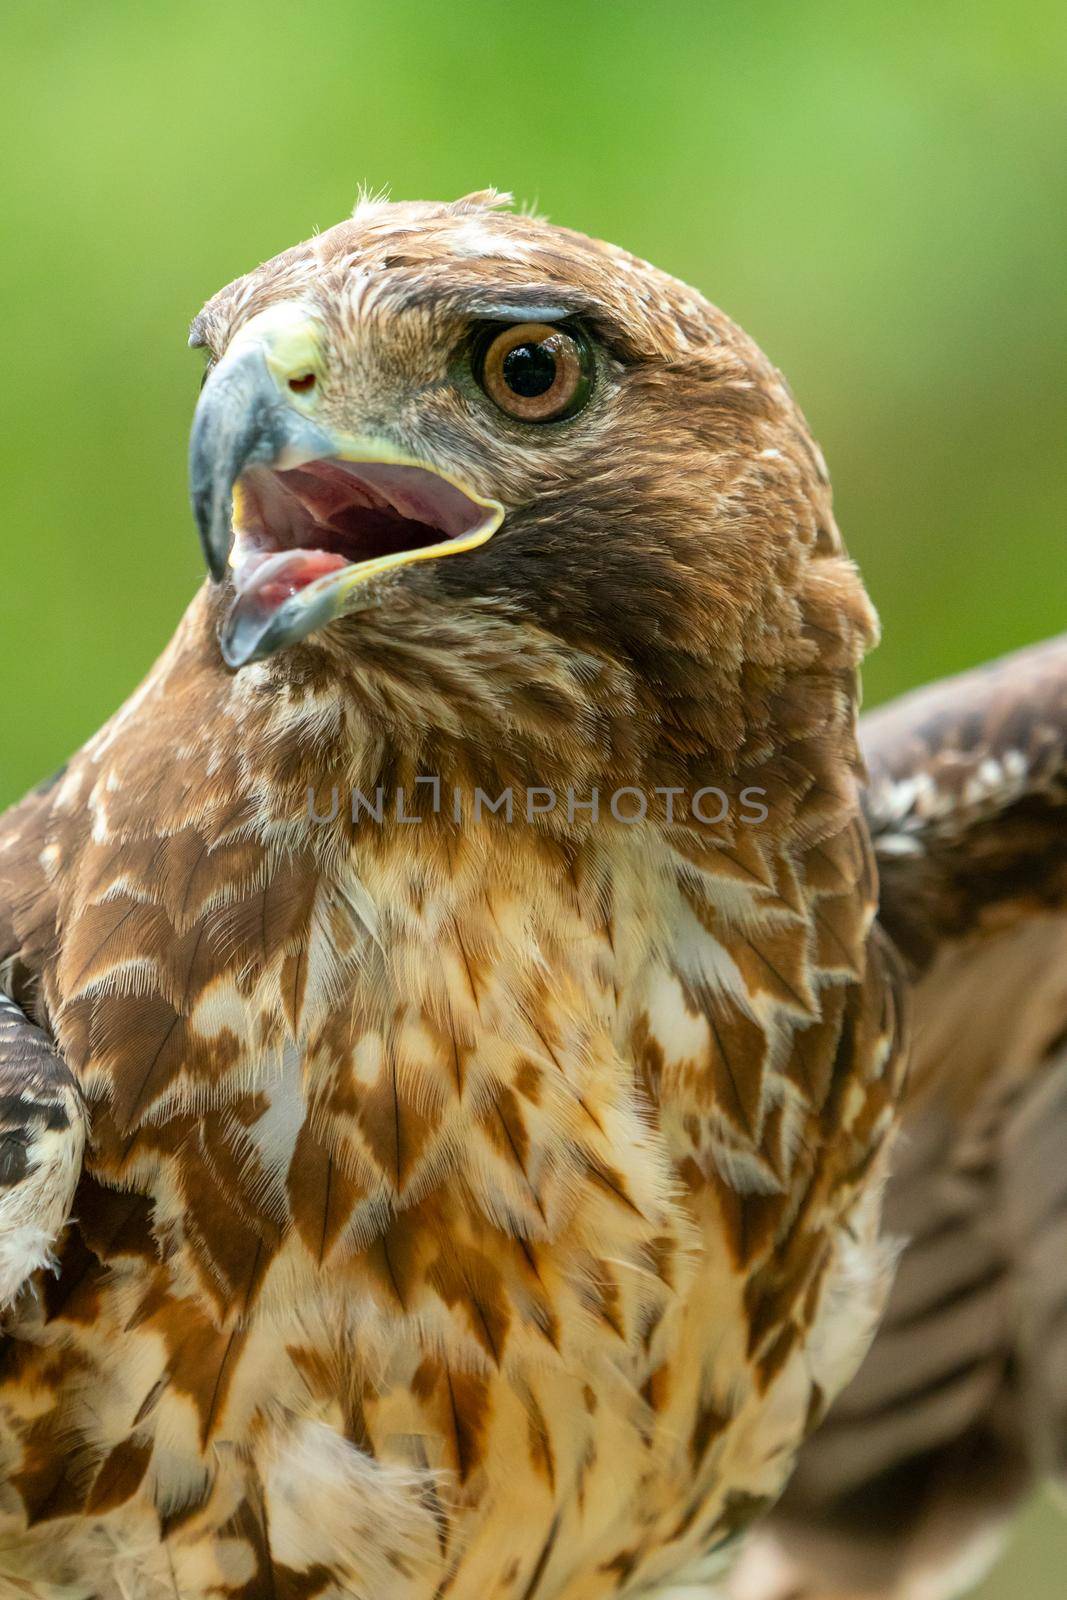 red-tailed hawk or Buteo jamaicensis close-up portrait. Wildlife photo